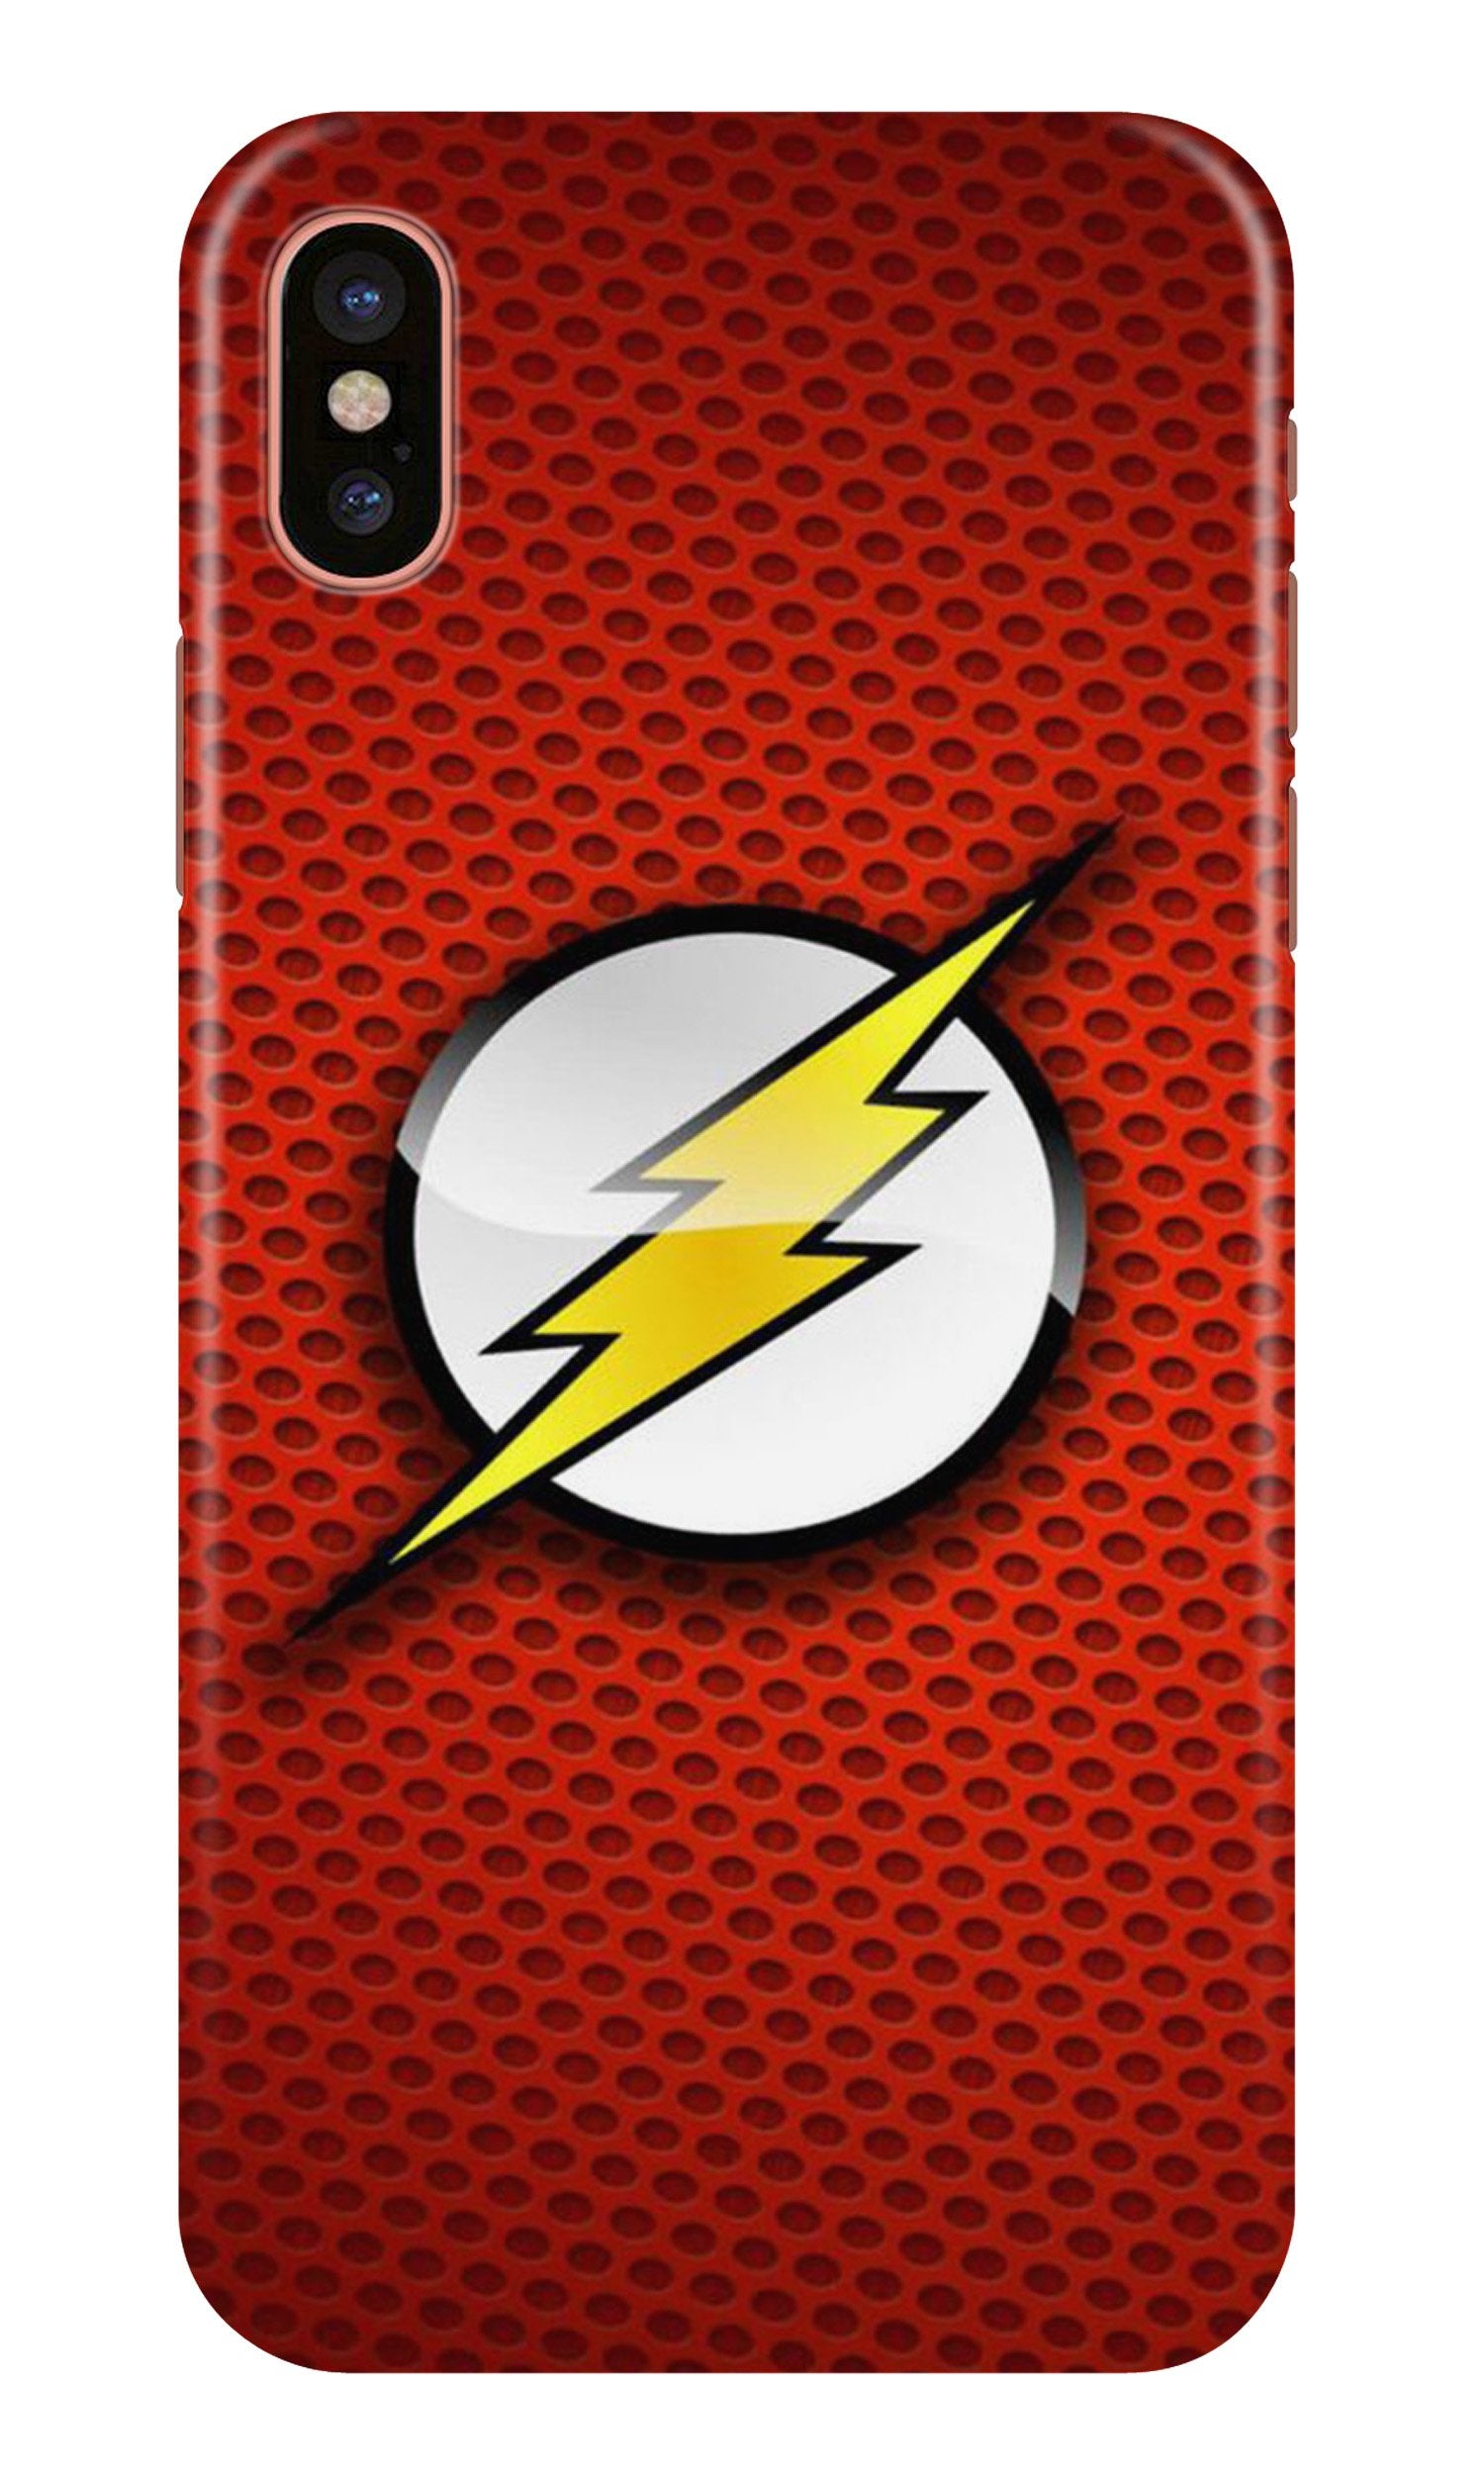 Flash Case for iPhone Xr (Design No. 252)